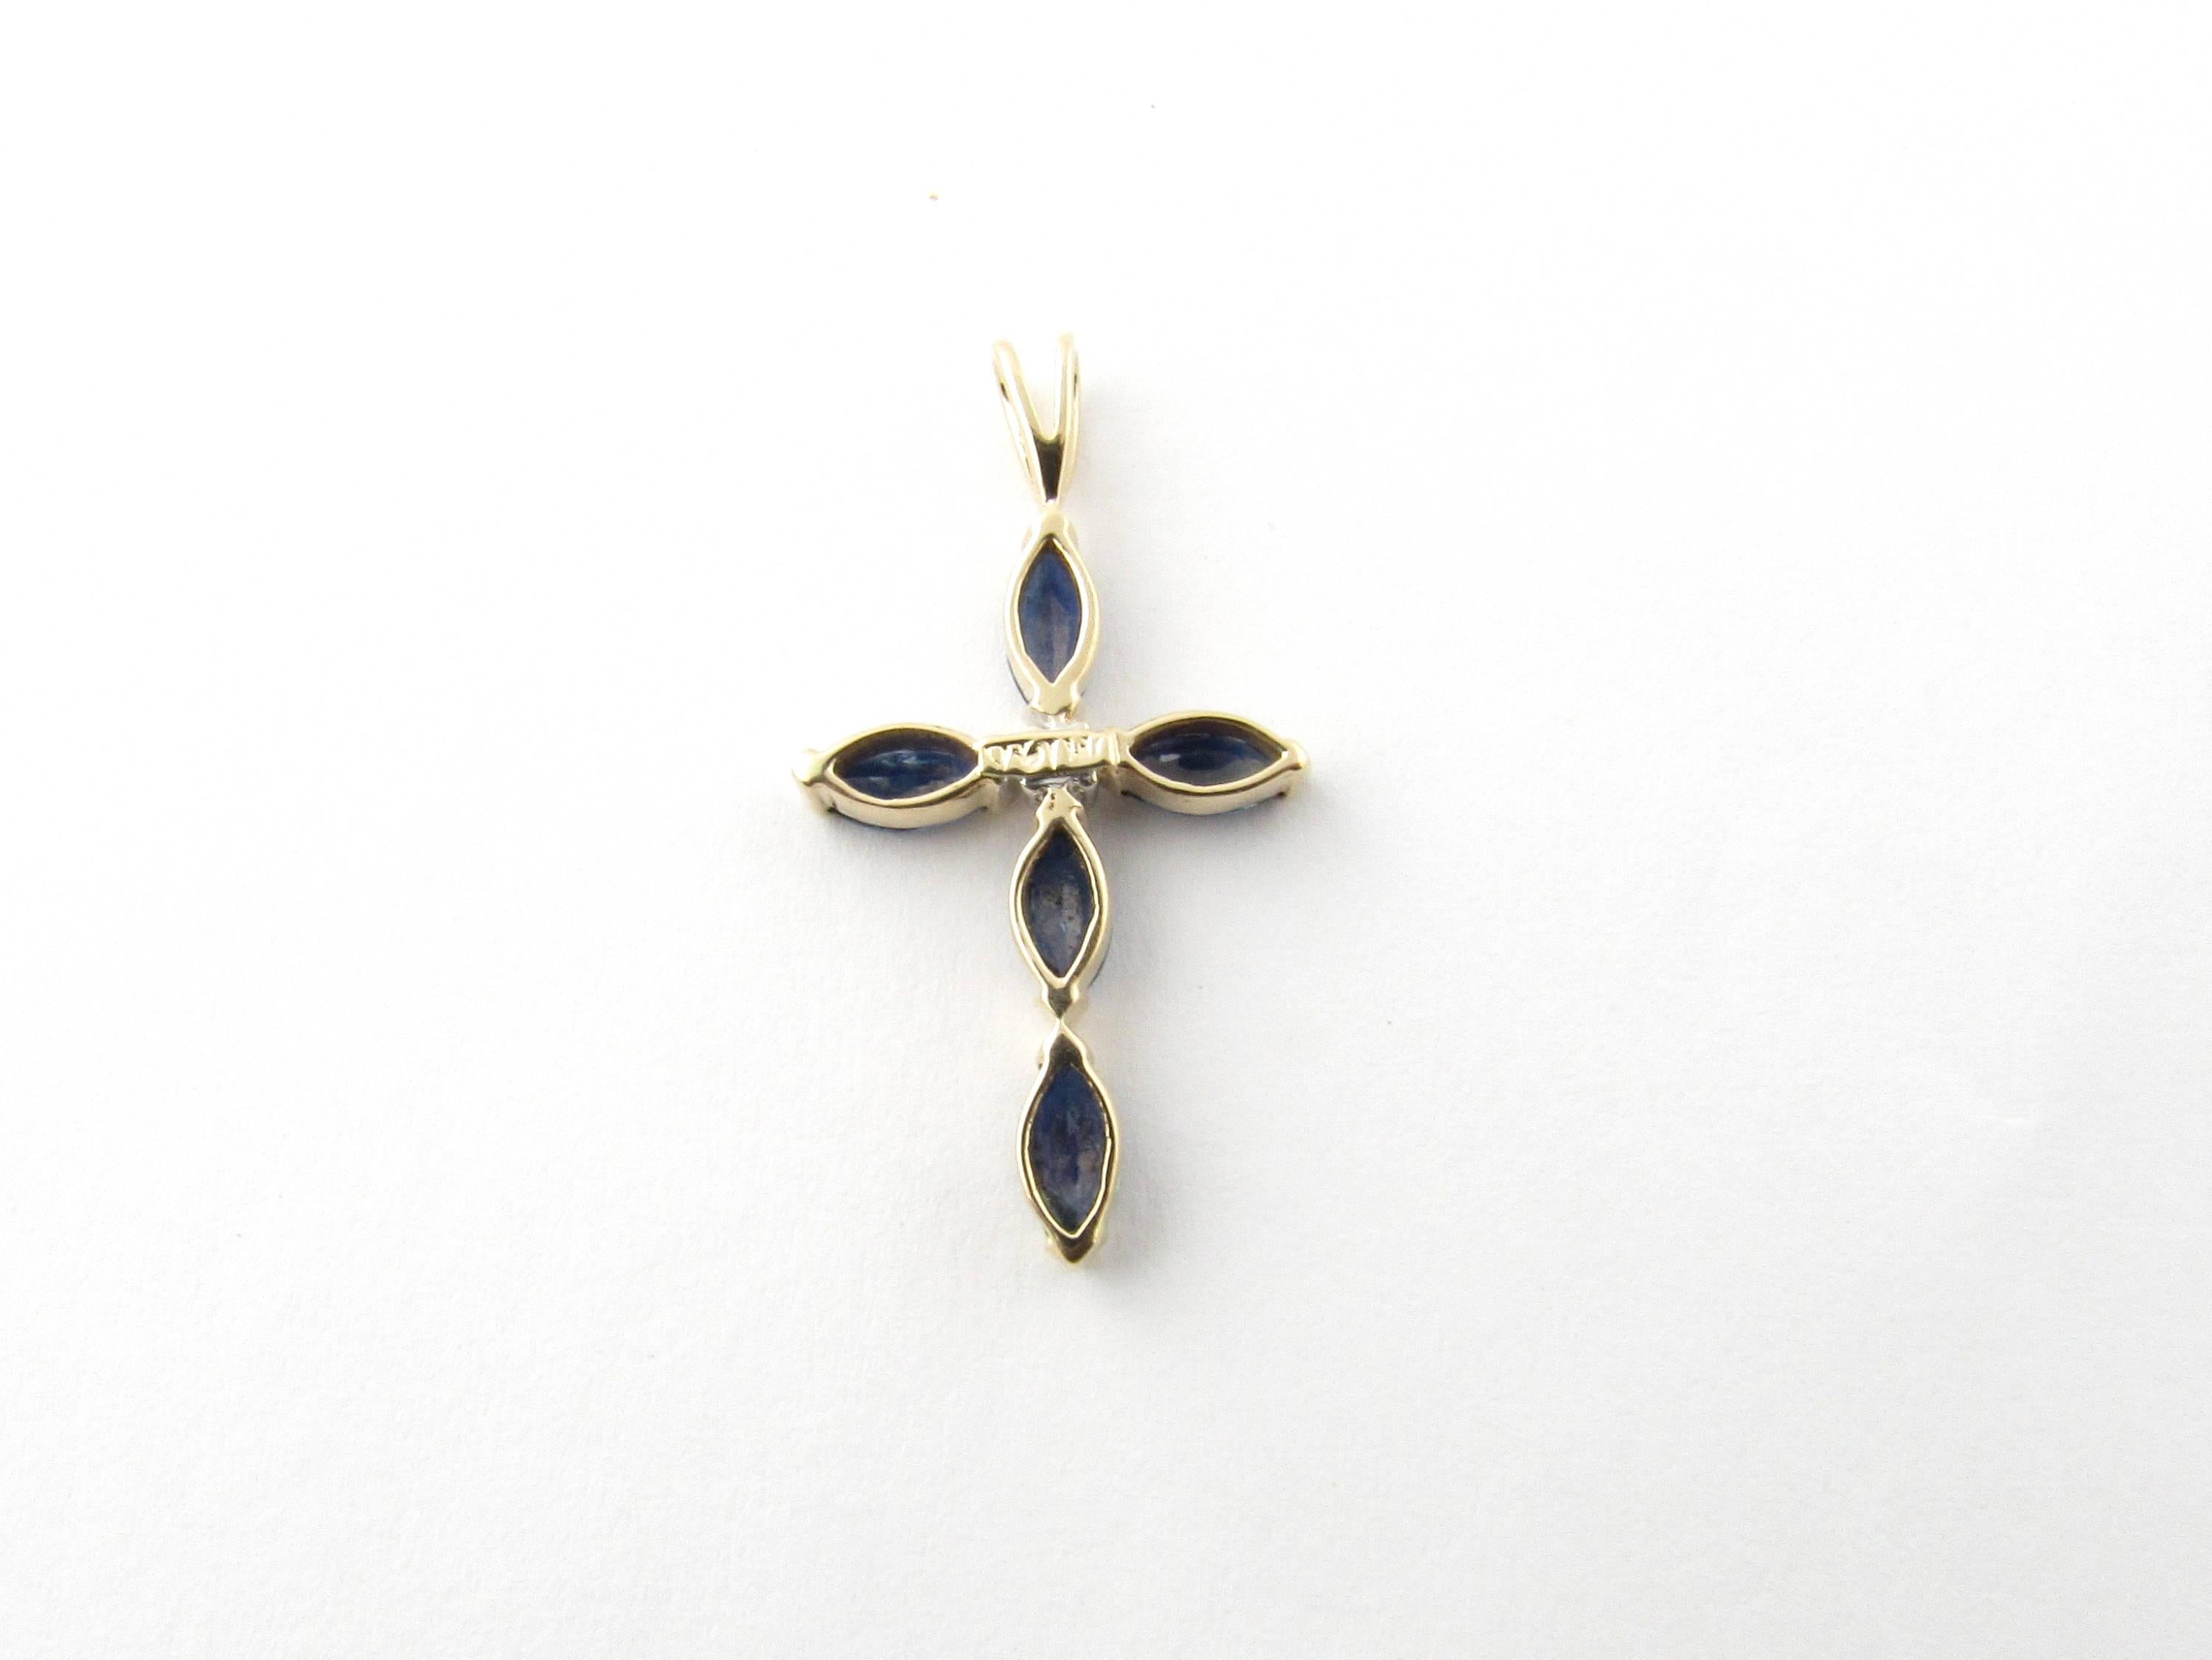 Vintage 14 Karat Yellow Gold Sapphire and Diamond Cross Pendant

This stunning cross pendant features five marquis sapphires accented with one round brilliant cut diamond in its center.

Approximate total diamond weight: .01 ct.

Diamond color: